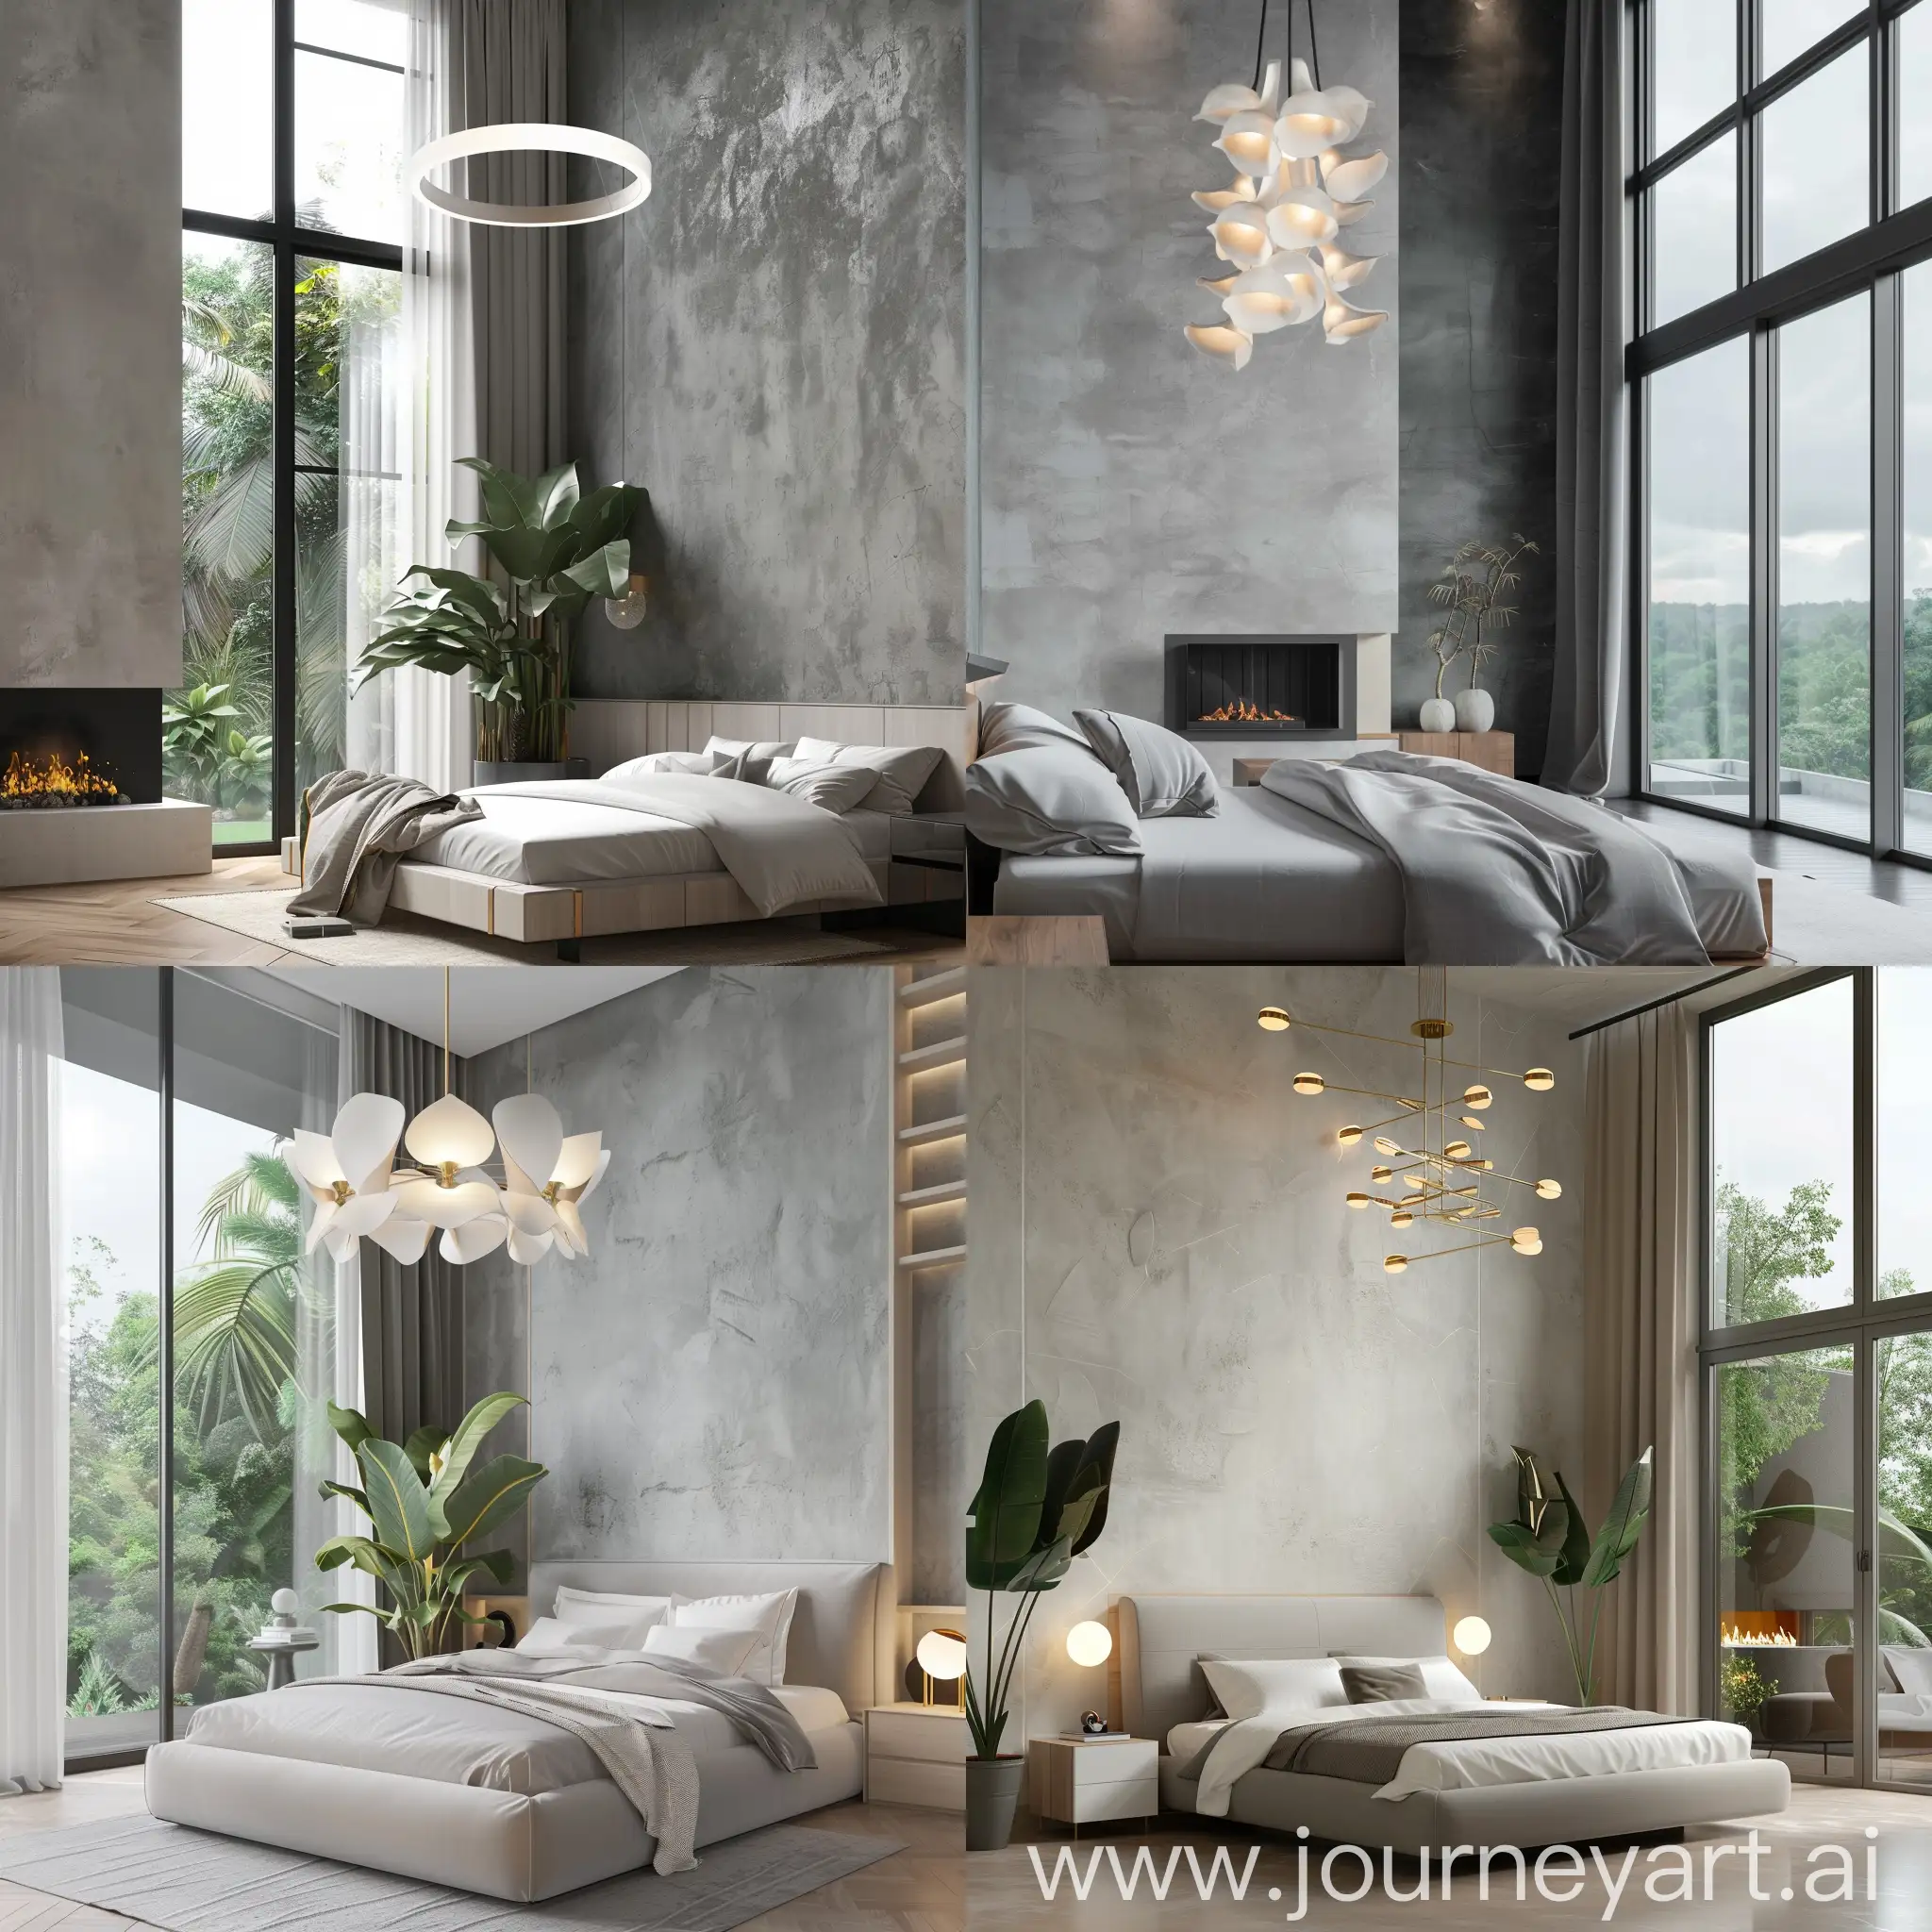 A modern gray white and thermowood bedroom
, modern decoration,
Large modern chandelier, soft light, complete furniture arrangement, a plaster wall,
 tall window, fireplace, a tall window wall, in the green tropical forest,
 Cloudy weather real photo